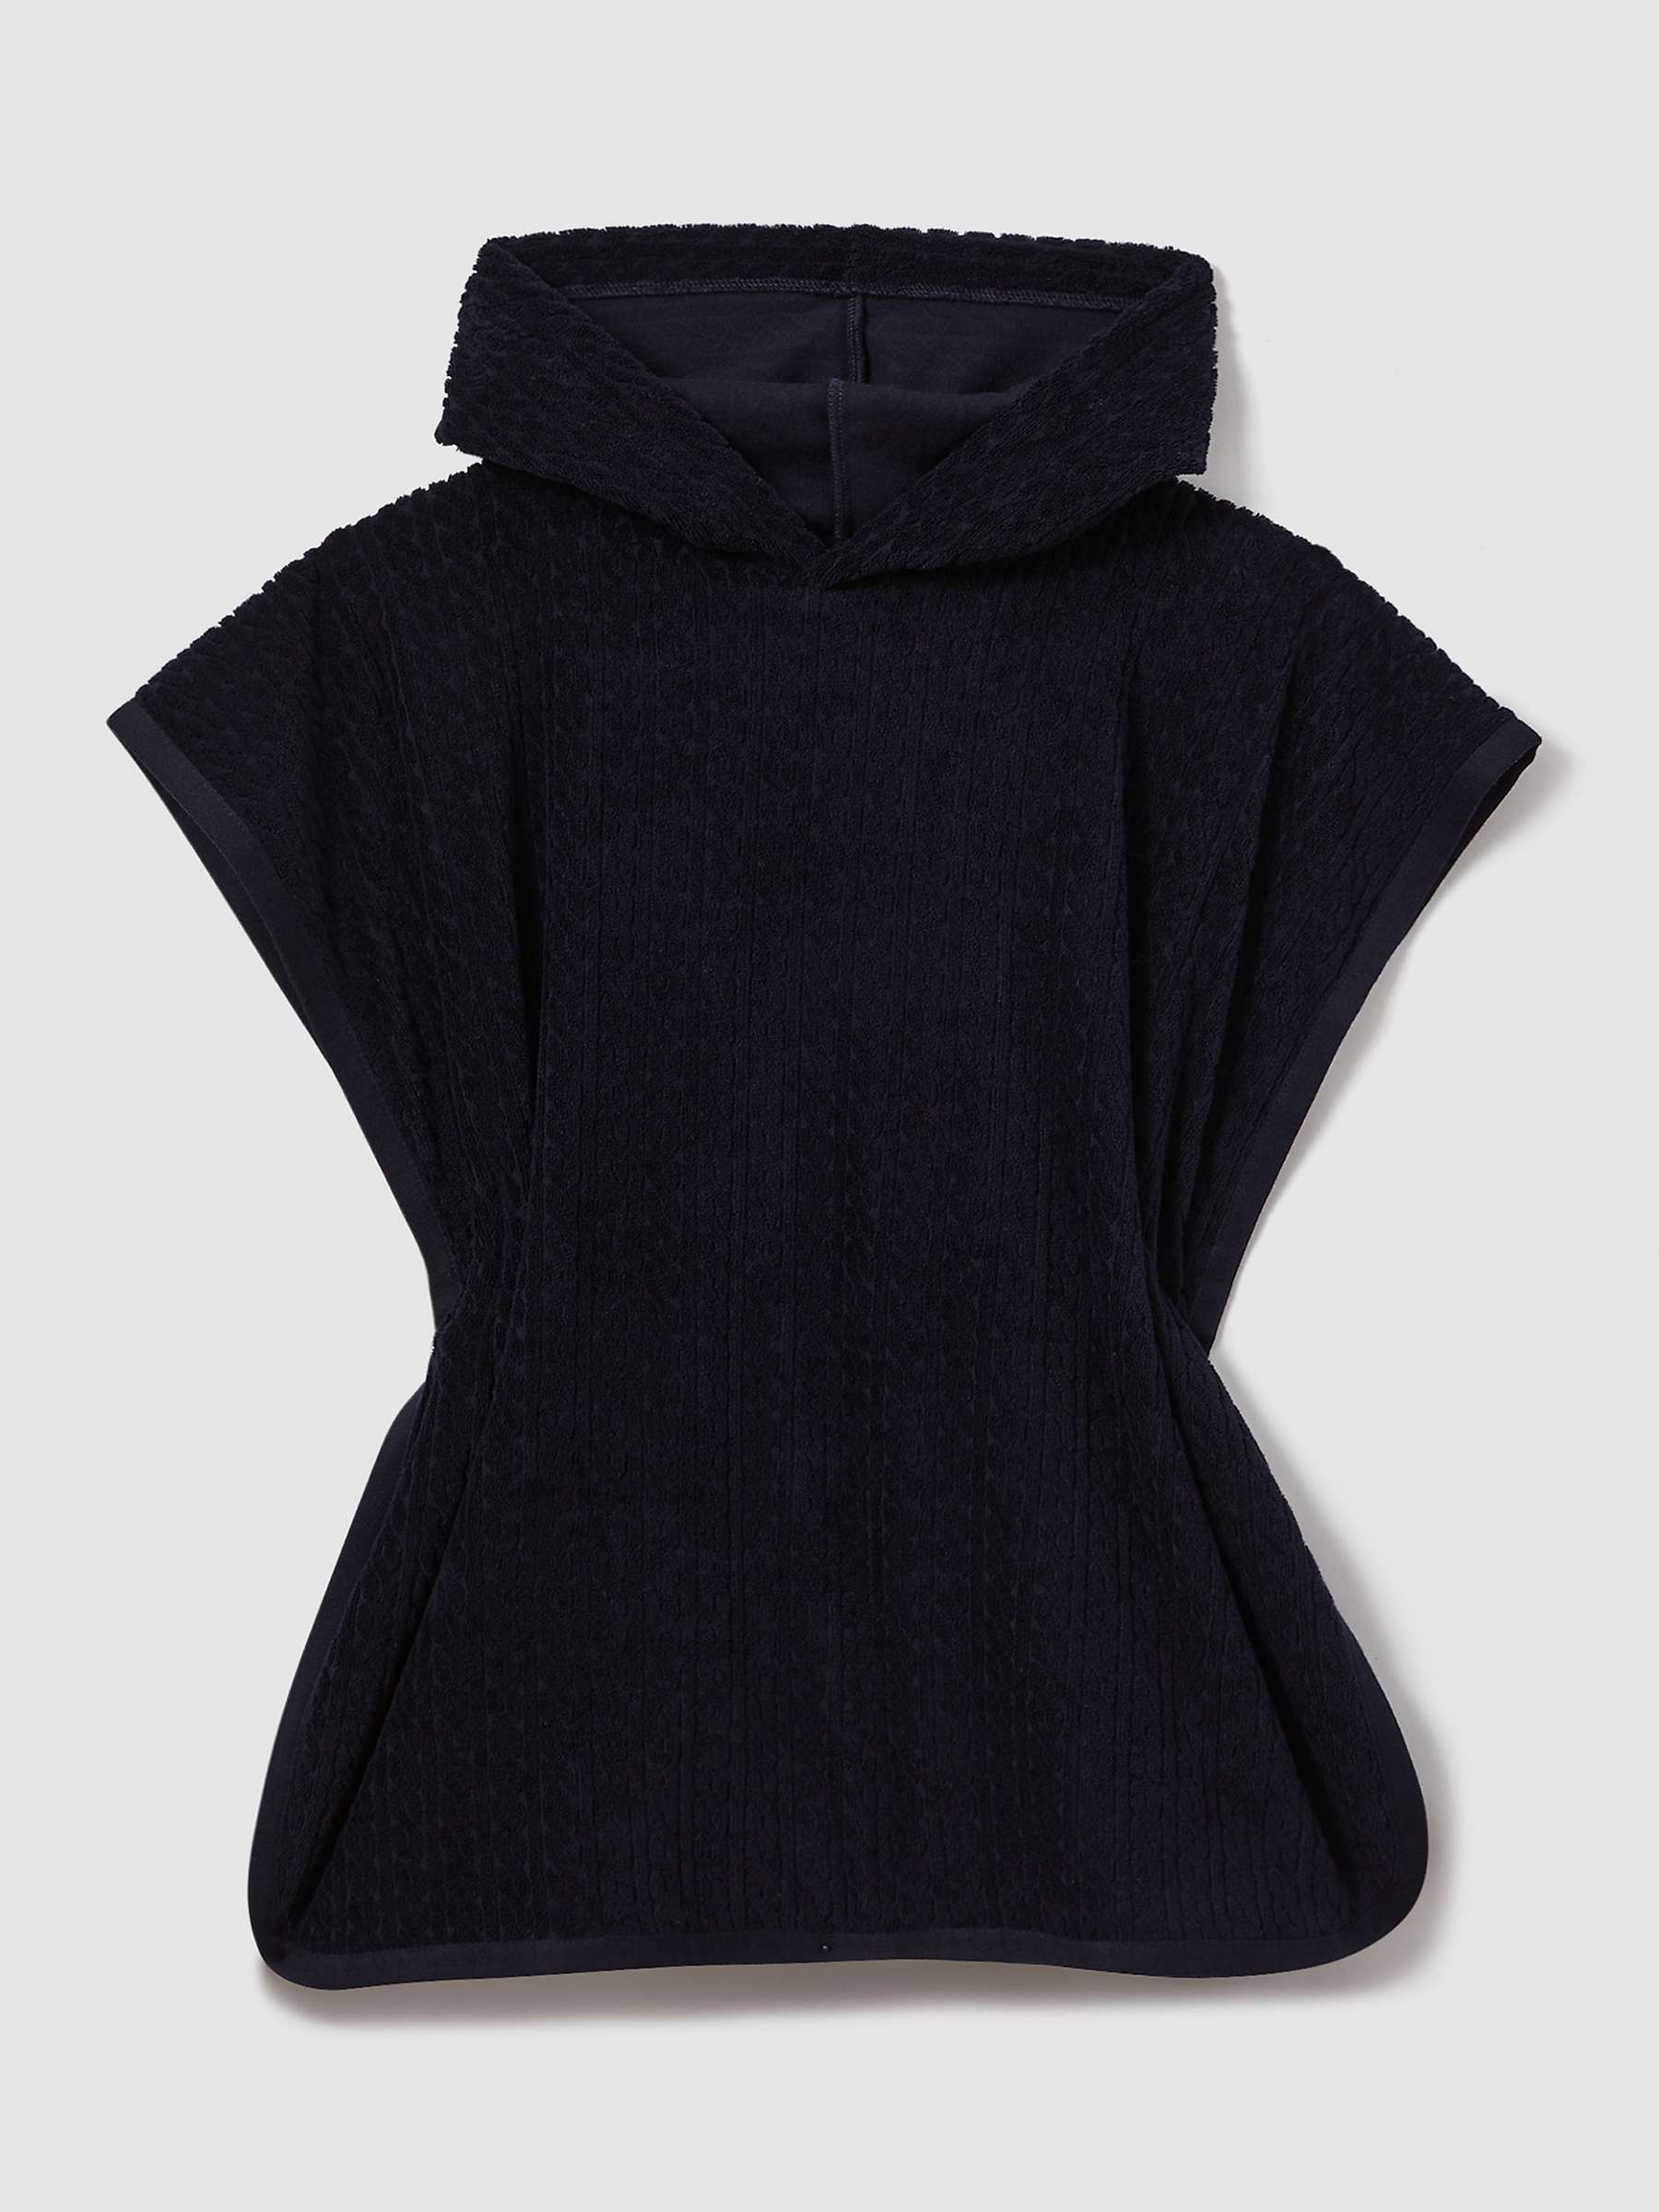 Buy Reiss Kids' Shine Textured Towelling Hooded Poncho, Navy Online at johnlewis.com